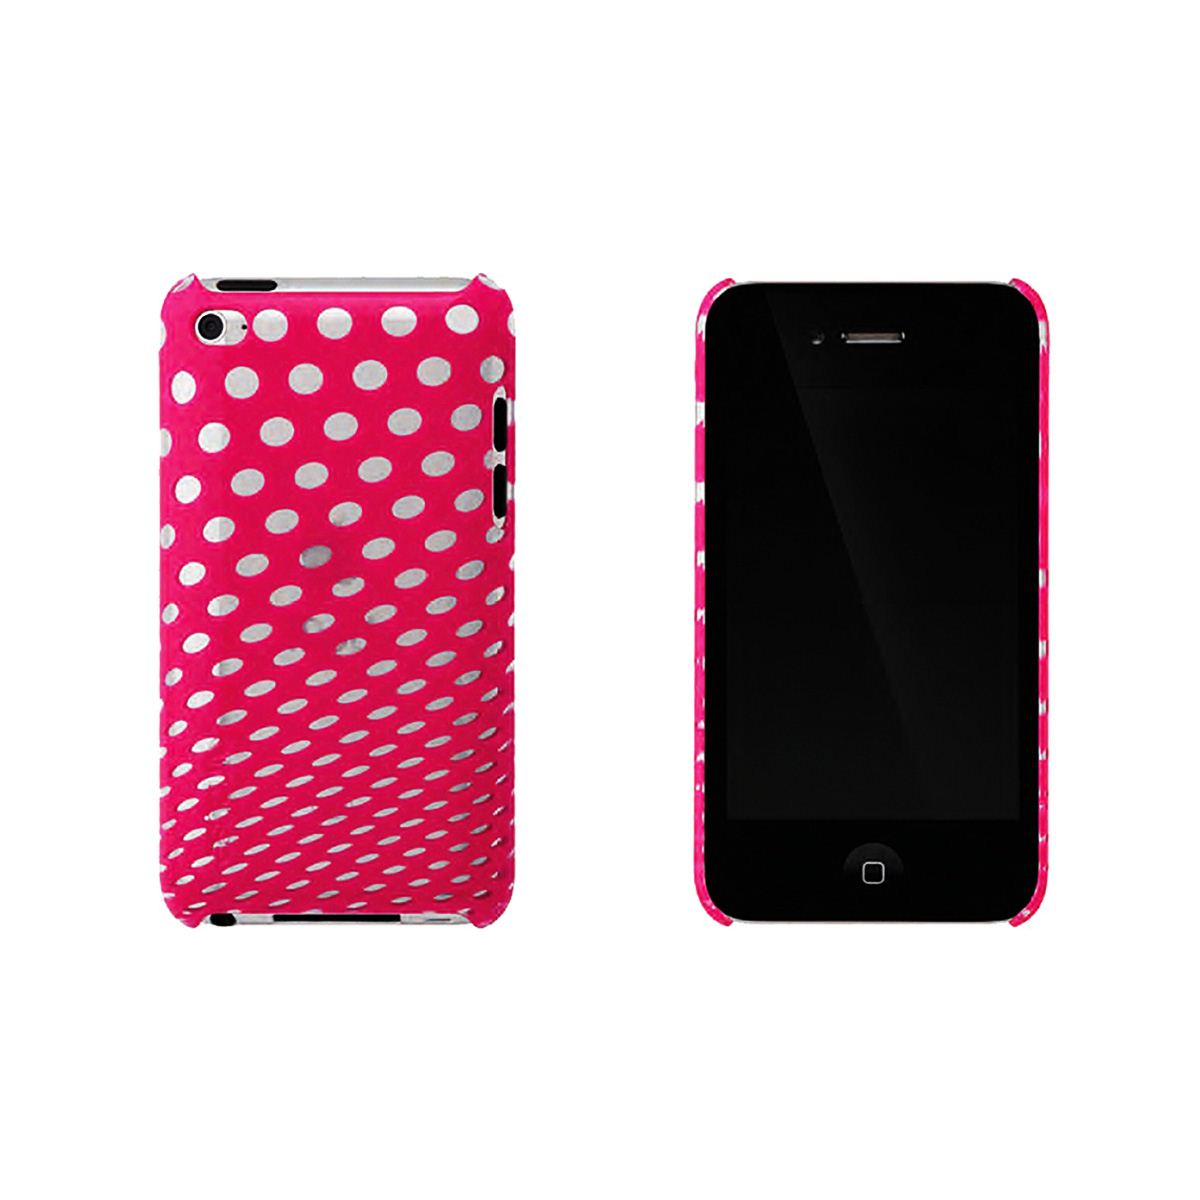 Incase Warped Snap Case for iPod Touch 4G Pop Pink